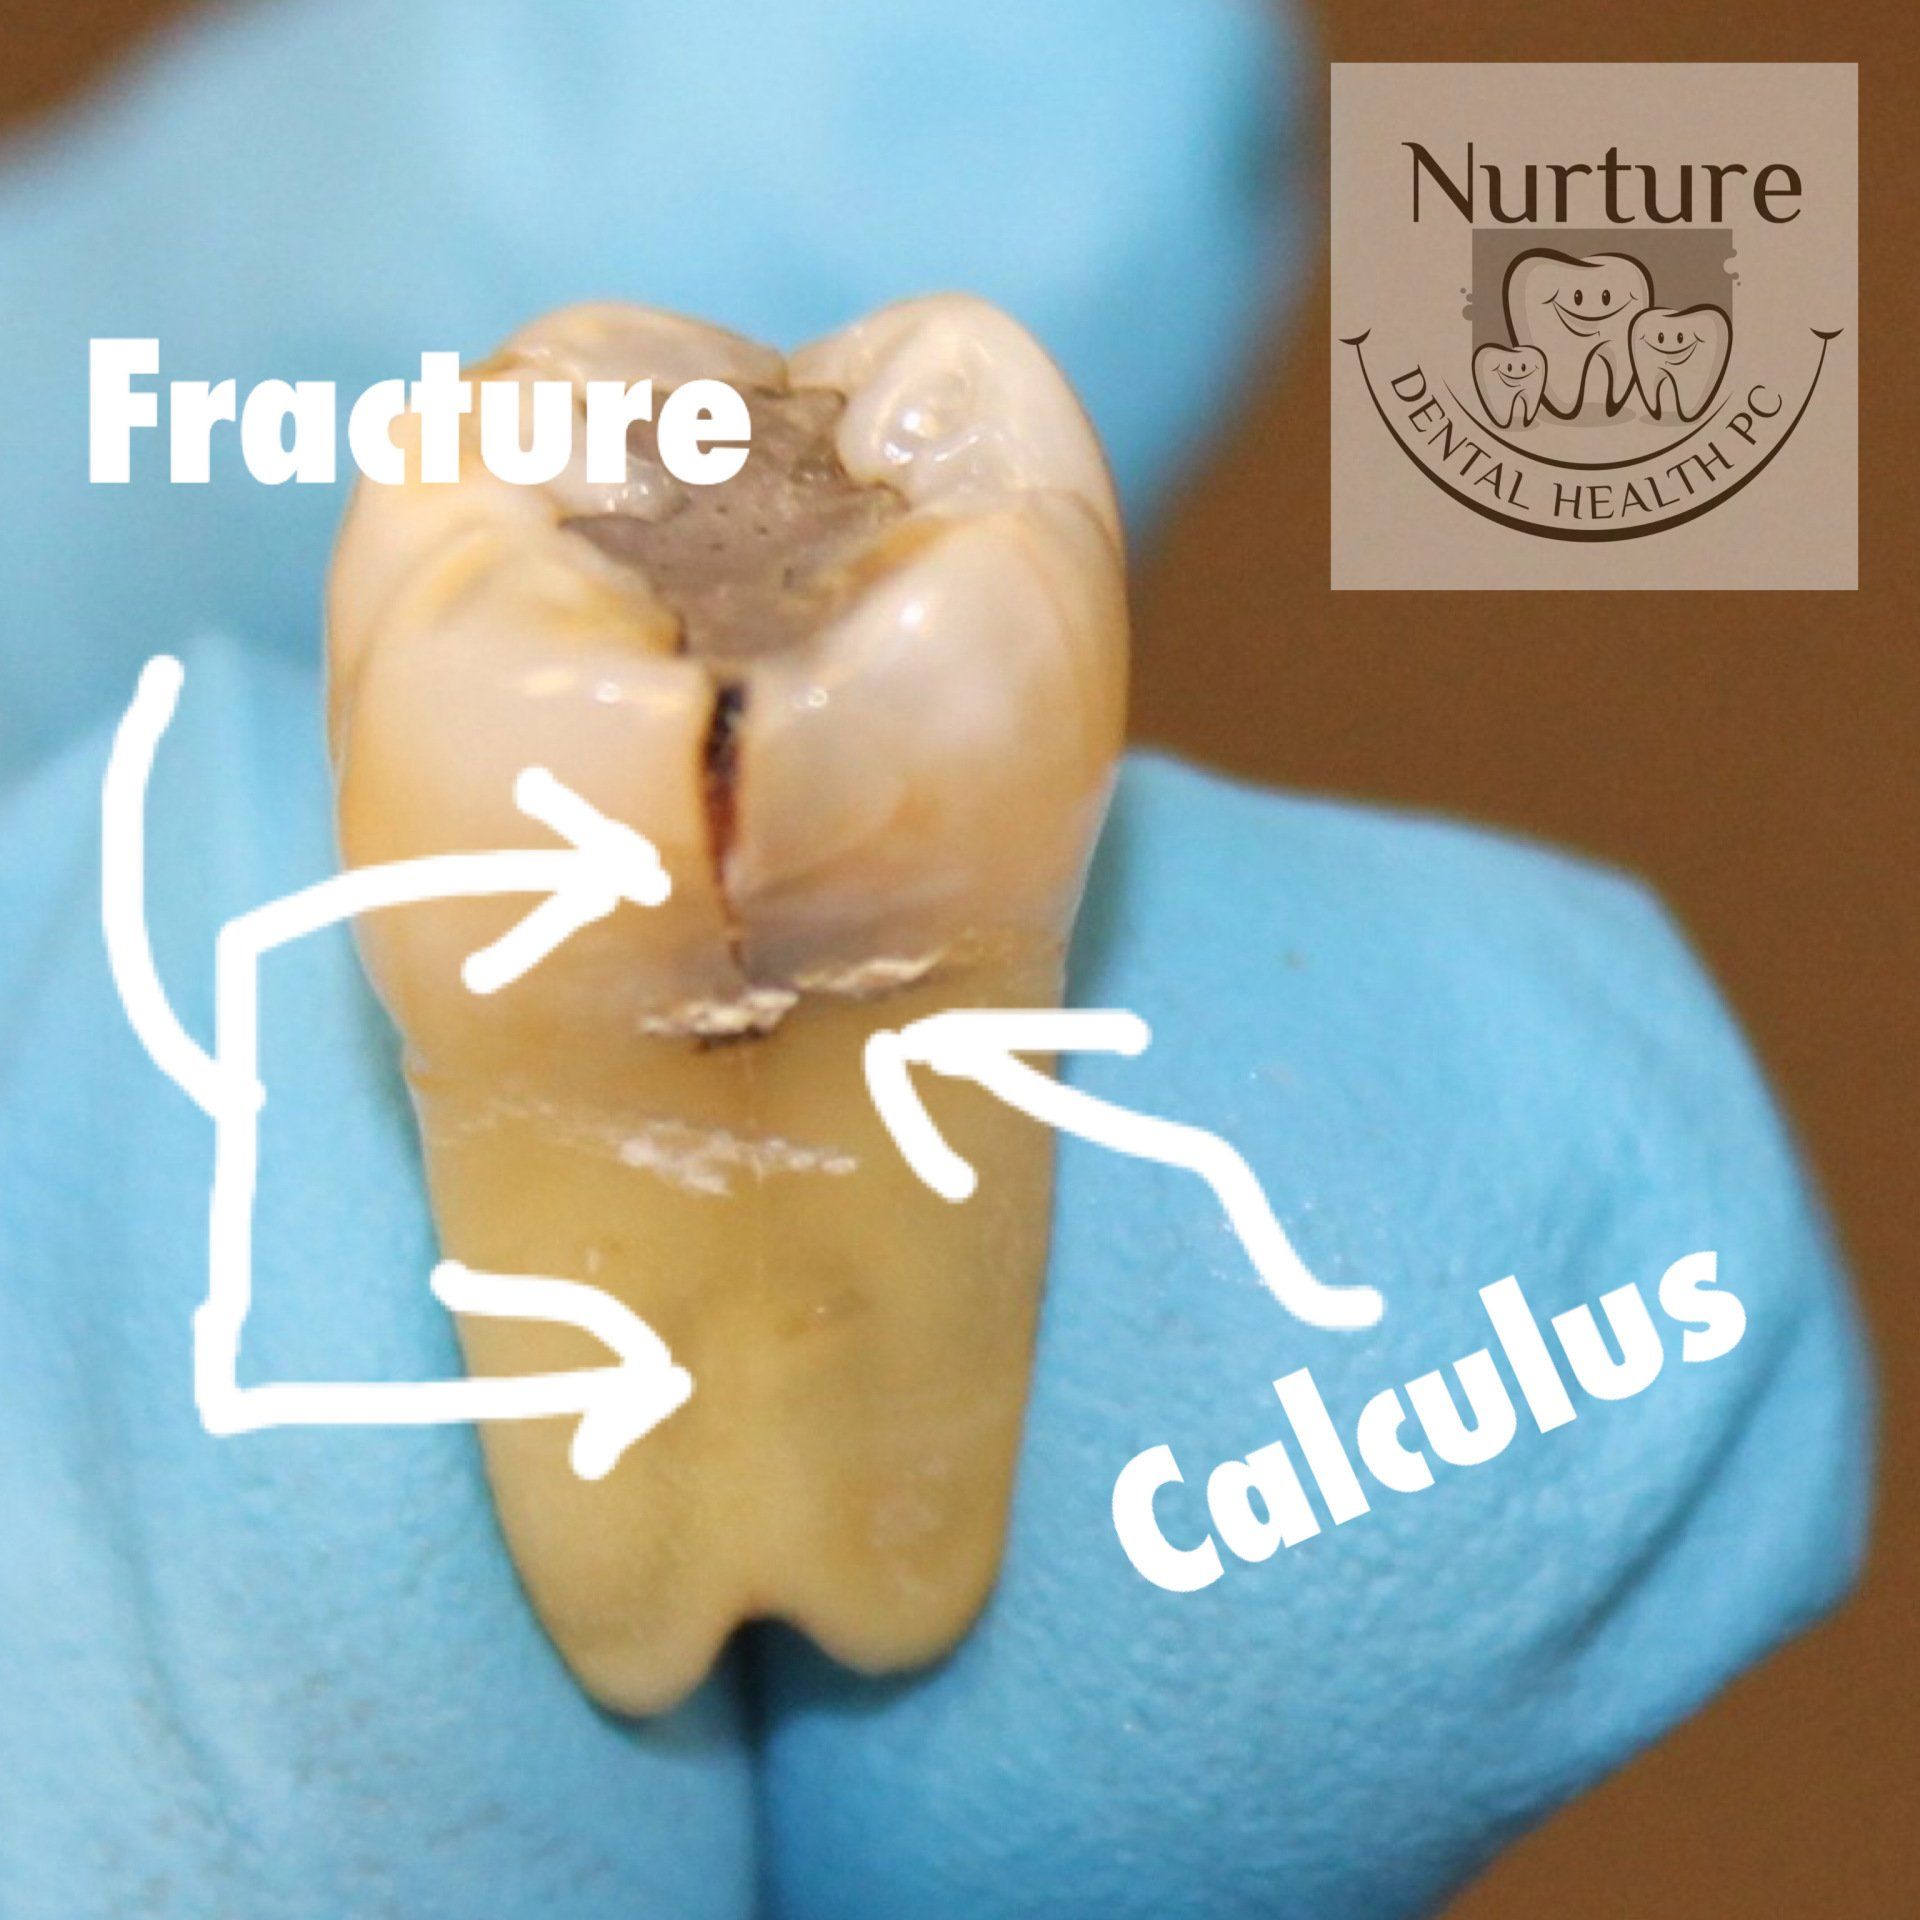 Fractured tooth that propagated down the root of the tooth with subgingival calculus attached to the root surface.